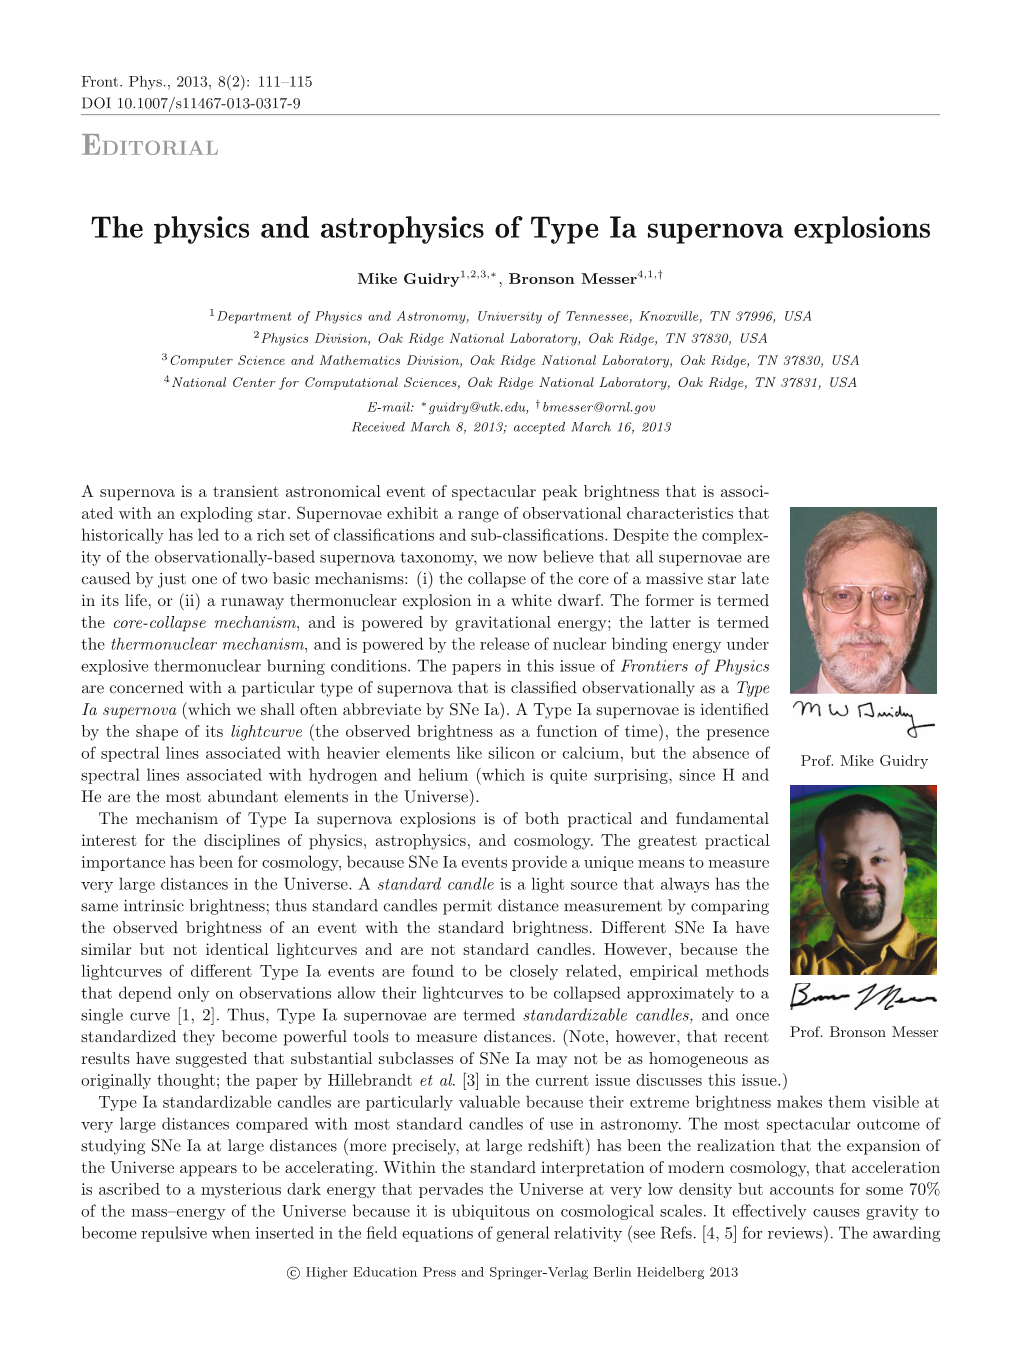 The Physics and Astrophysics of Type Ia Supernova Explosions